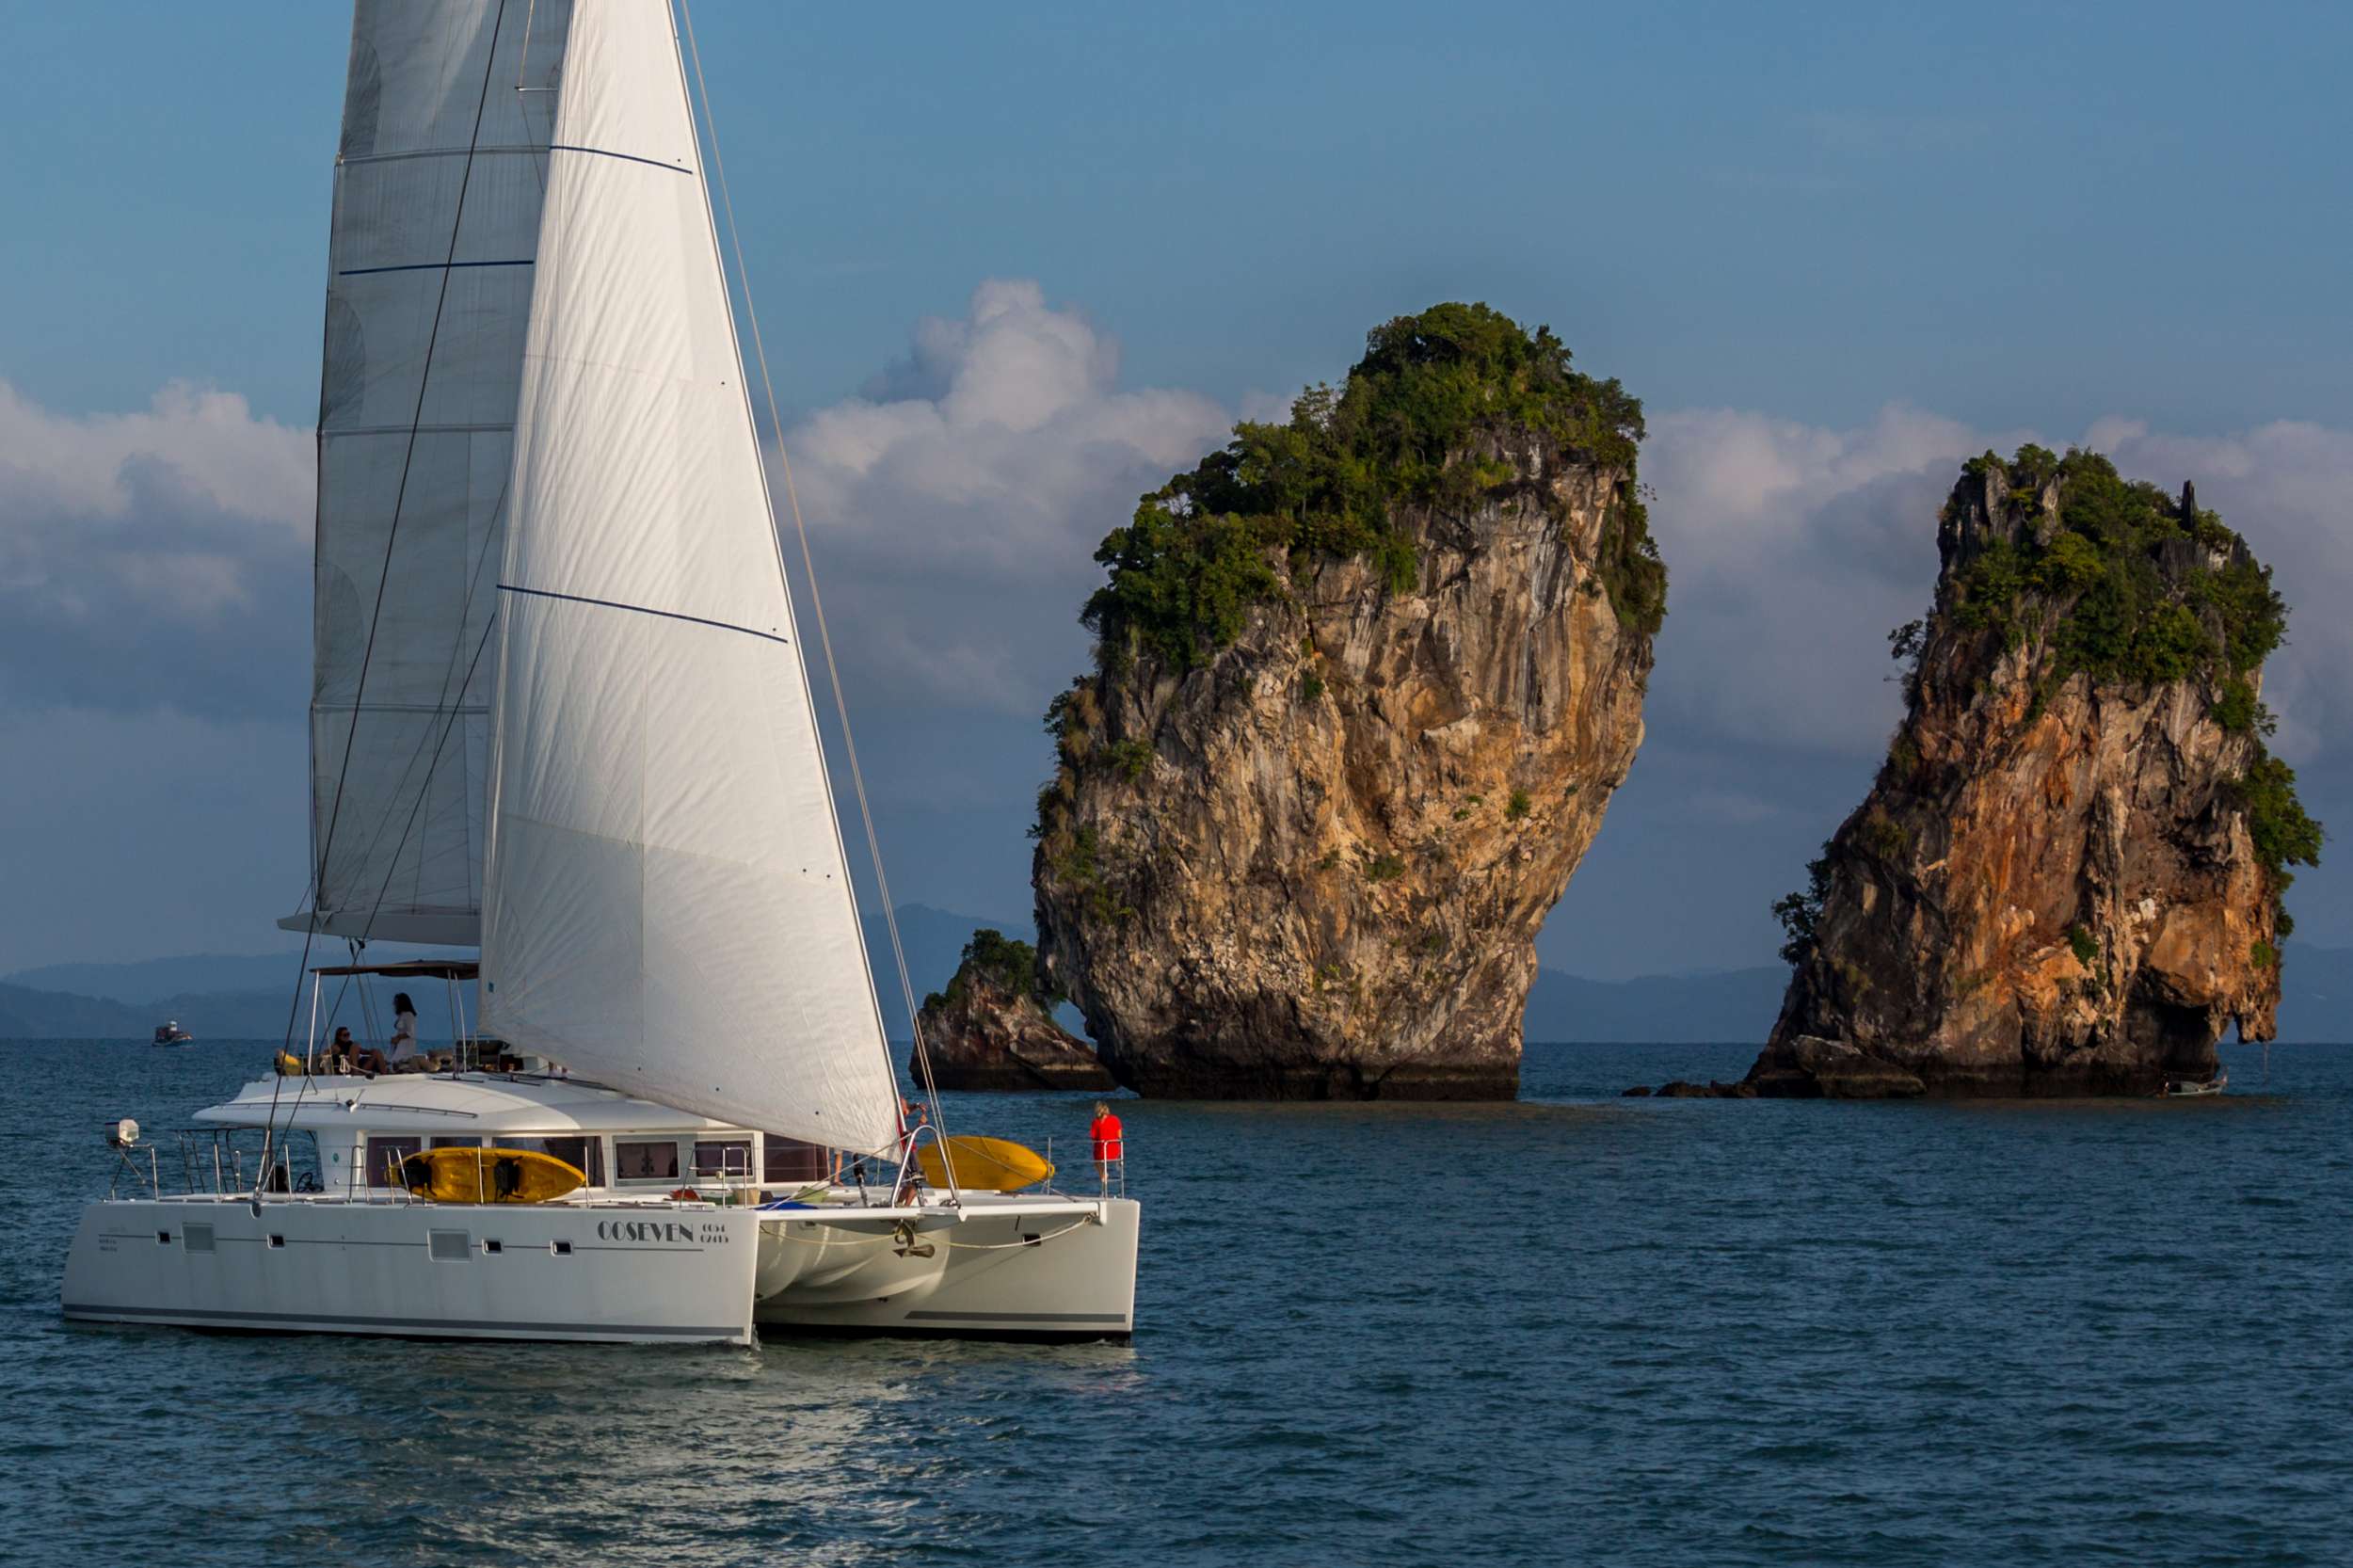 00SEVEN - Yacht Charter Malaysia & Boat hire in SE Asia 1